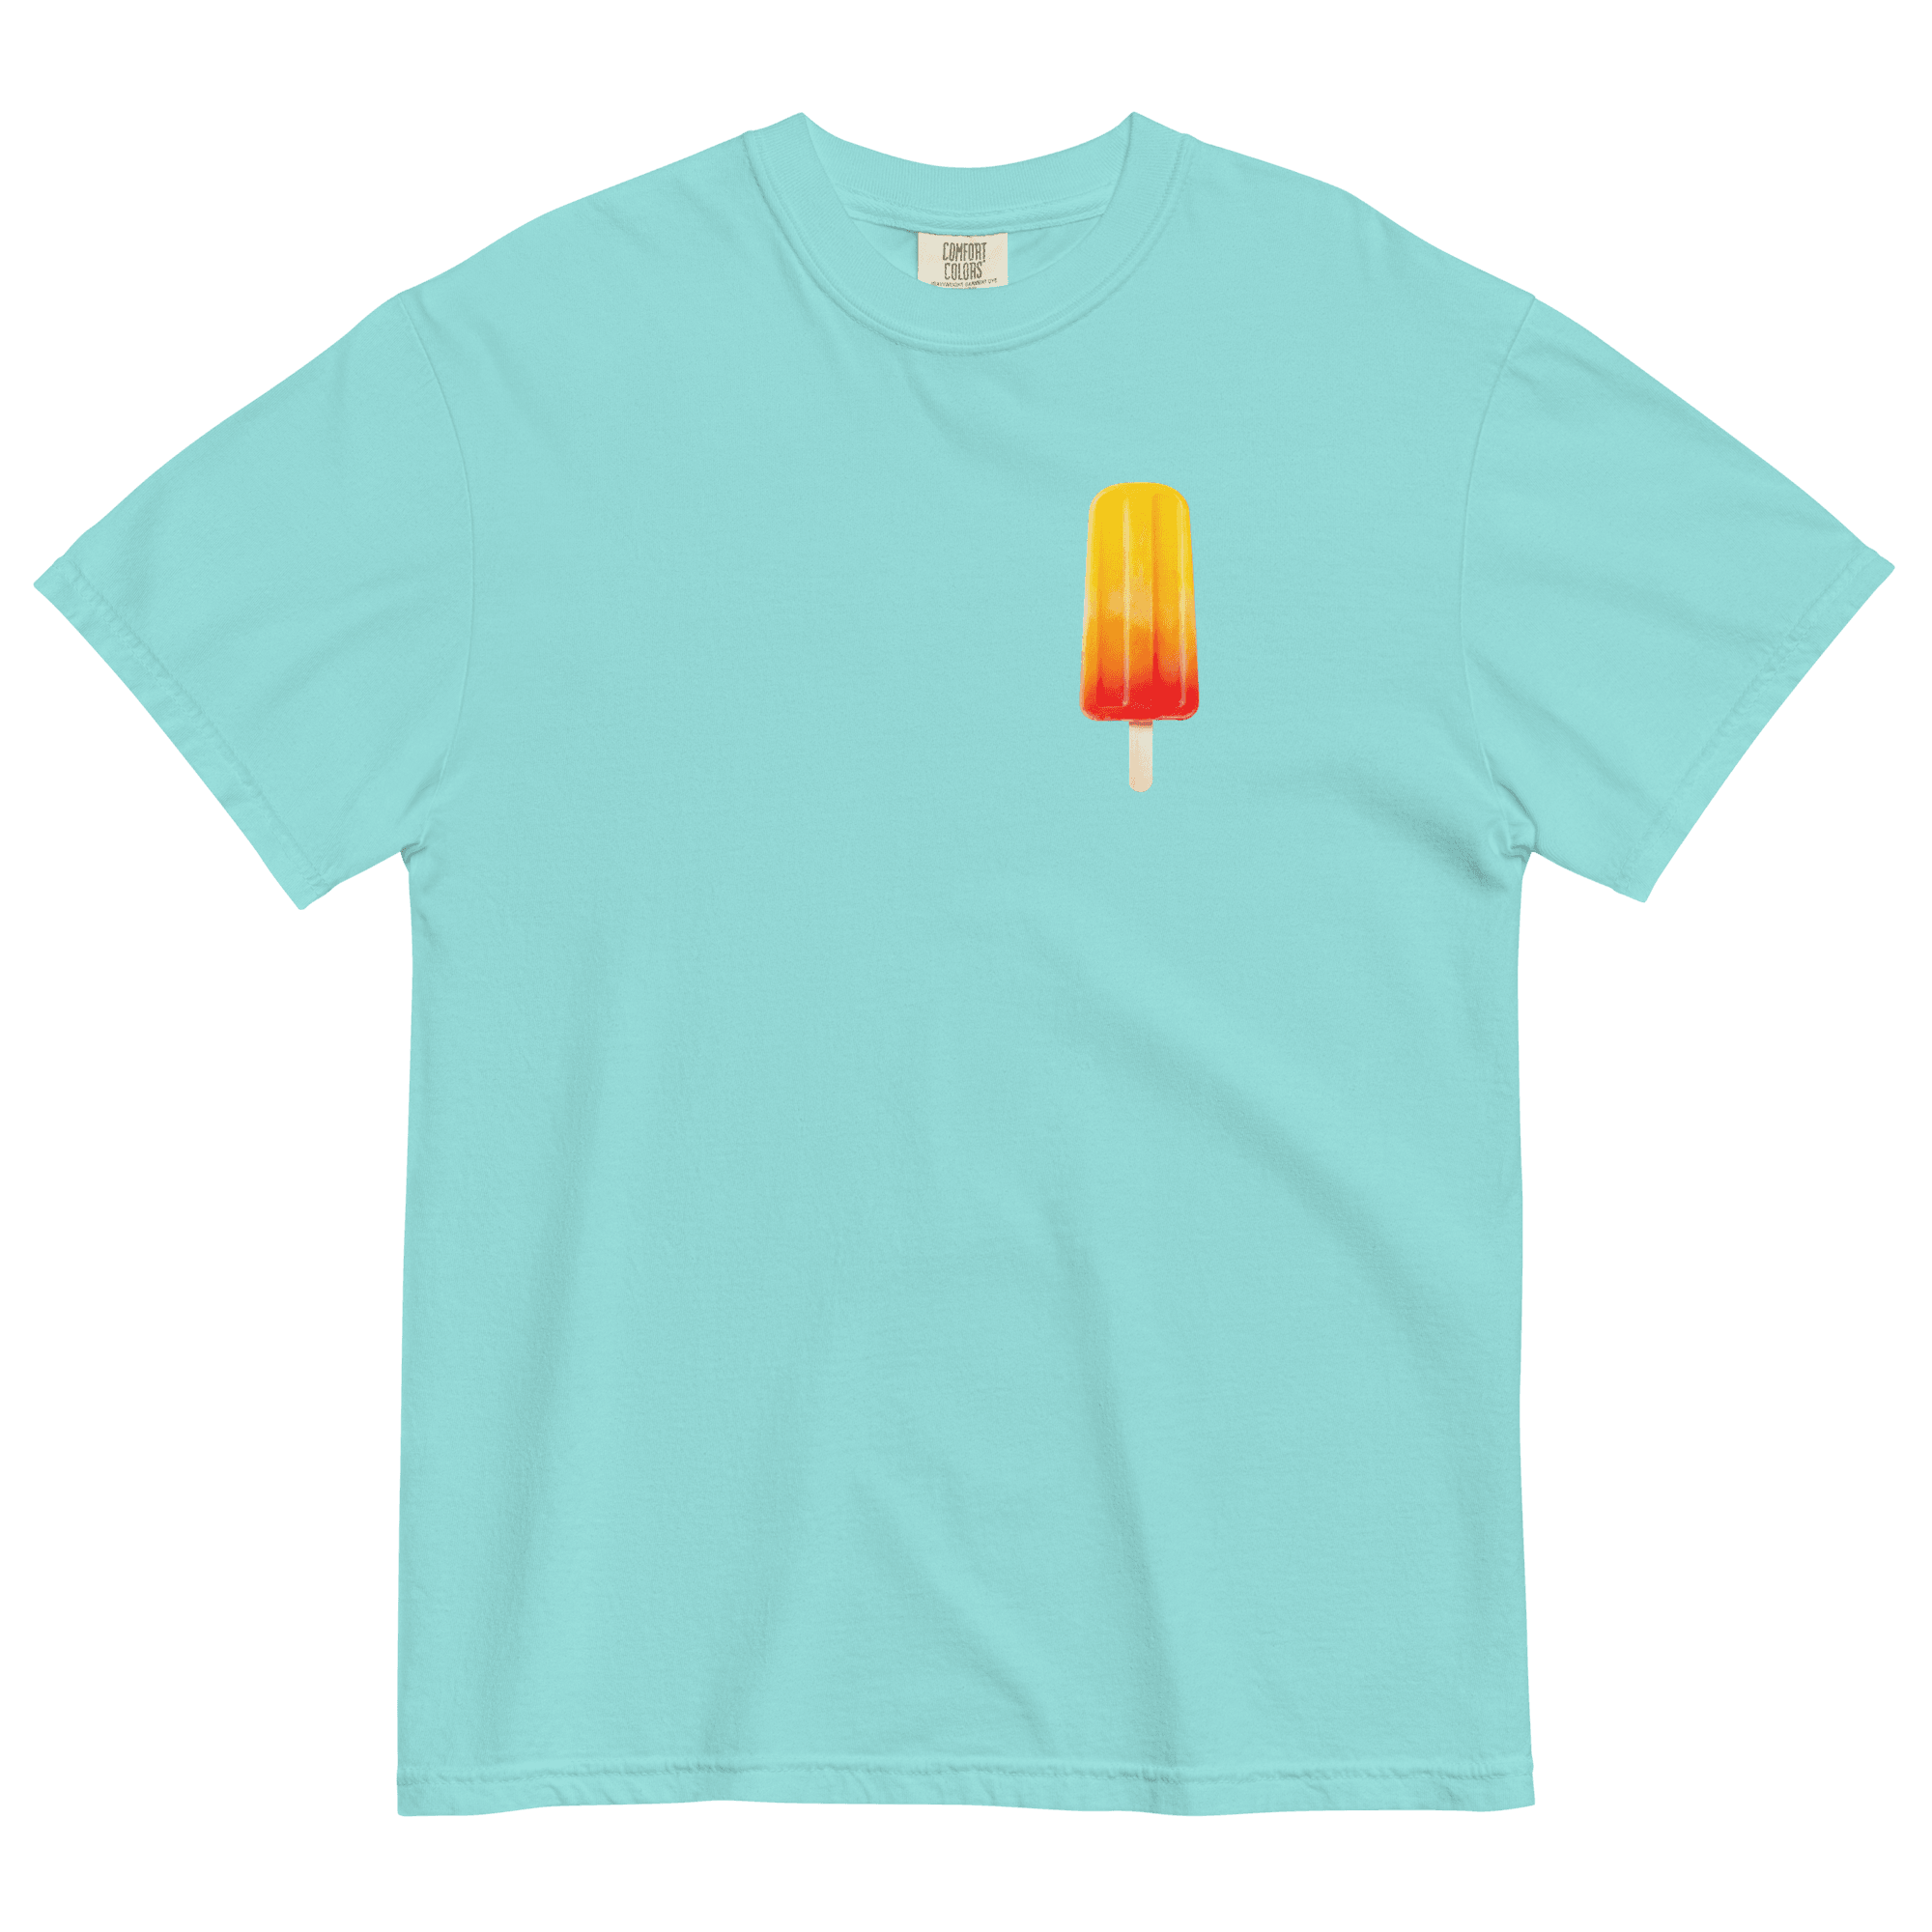 Popsicle T-shirt - Polychrome Goods 🍊